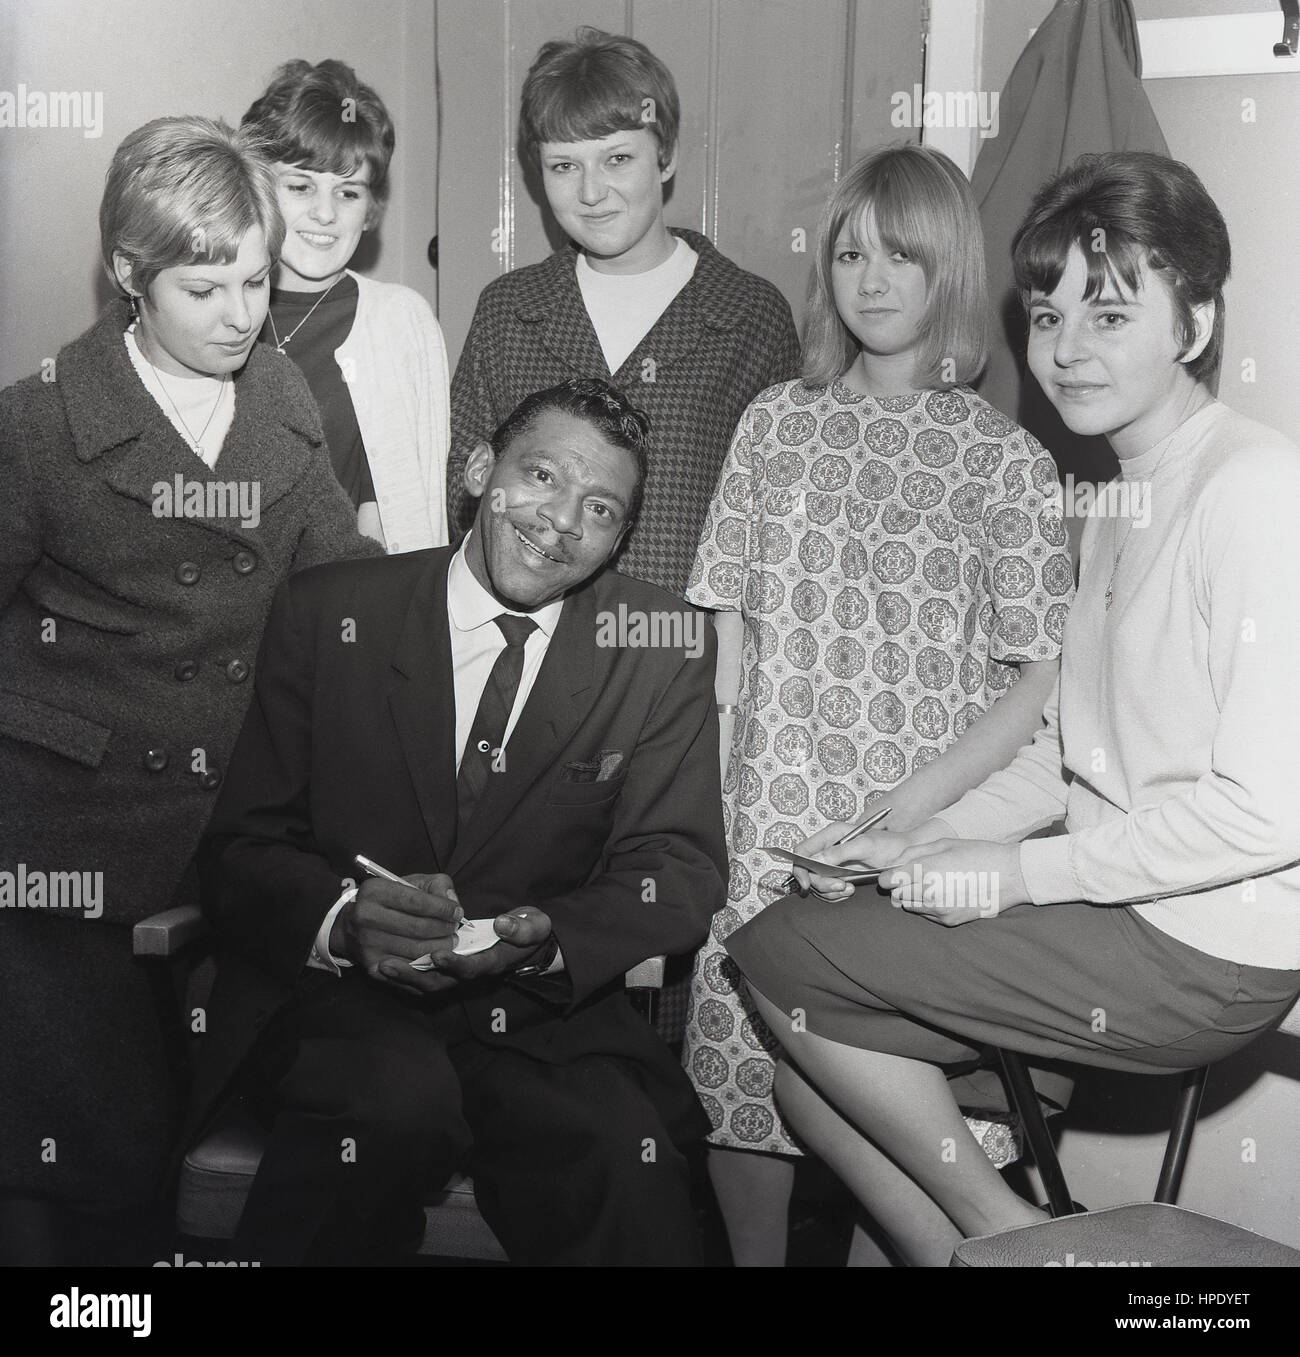 1964, historical, October, American musician, blues singer and famous harmonica player Little Walter with female fans, Borough Assembly Hall, Aylesbury, England, UK Stock Photo